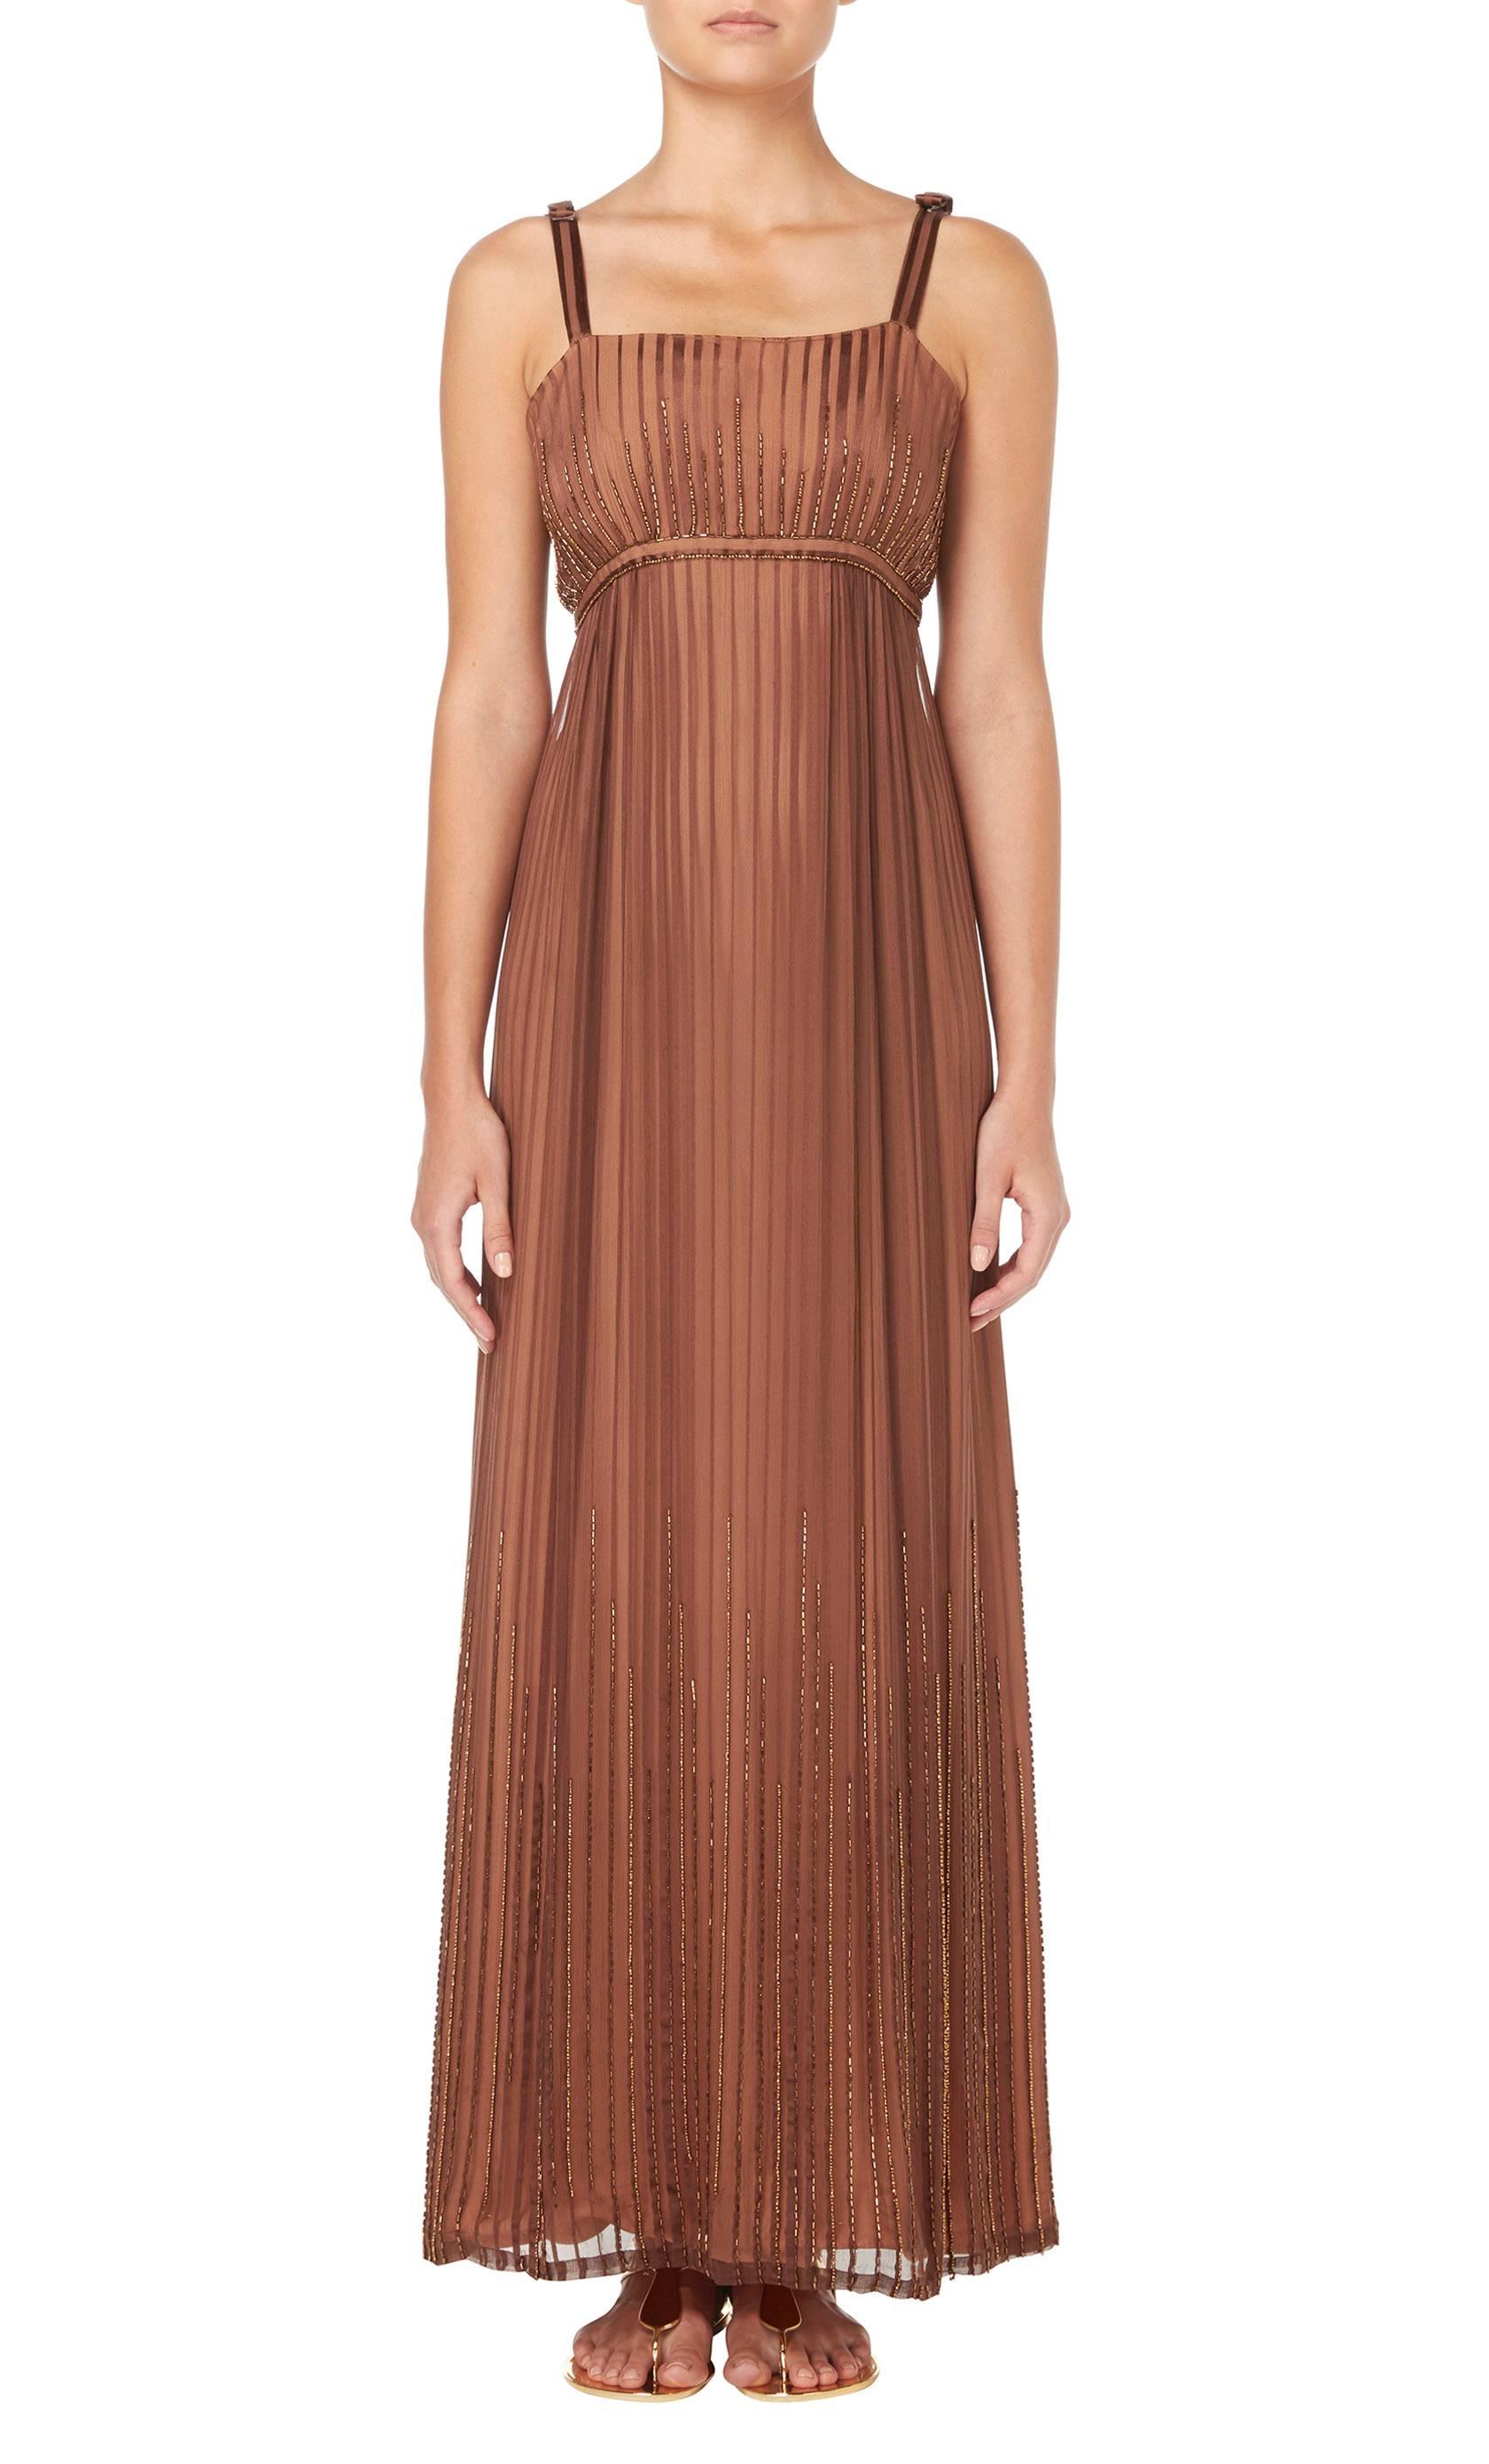 This beautiful summer dress by Alfred Bosand is constructed in striped brown silk chiffon with a tan lining. The dress is beaded over the bust and around the hemline and features a bow detail on the straps. Team with flat sandals and a raffia bag